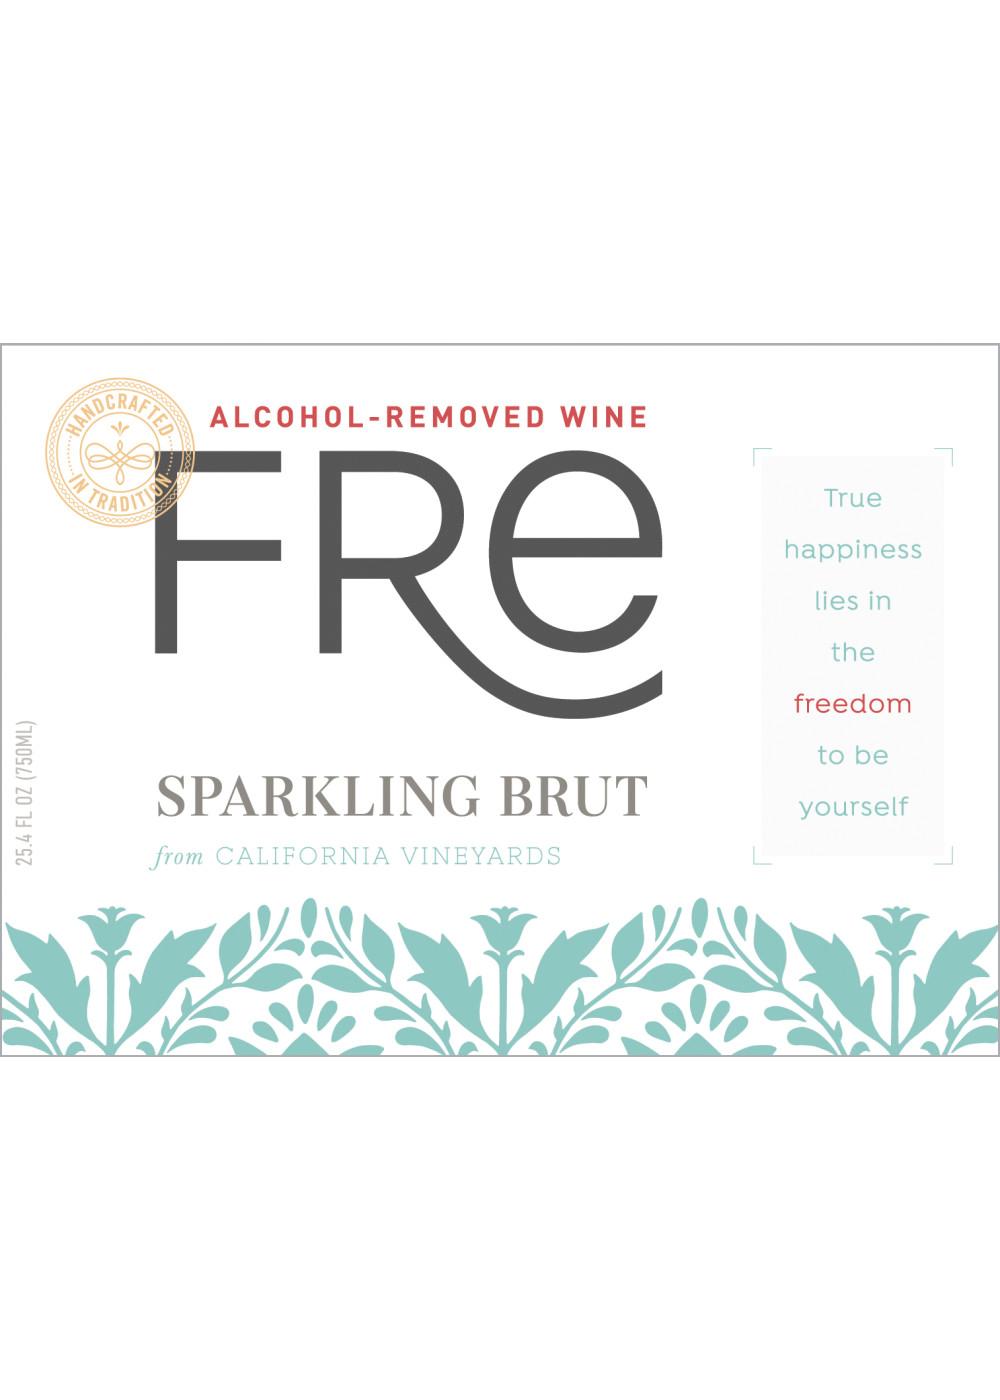 Sutter Home Family Vineyards Fre Alcohol Removed Sparkling Brut; image 3 of 5